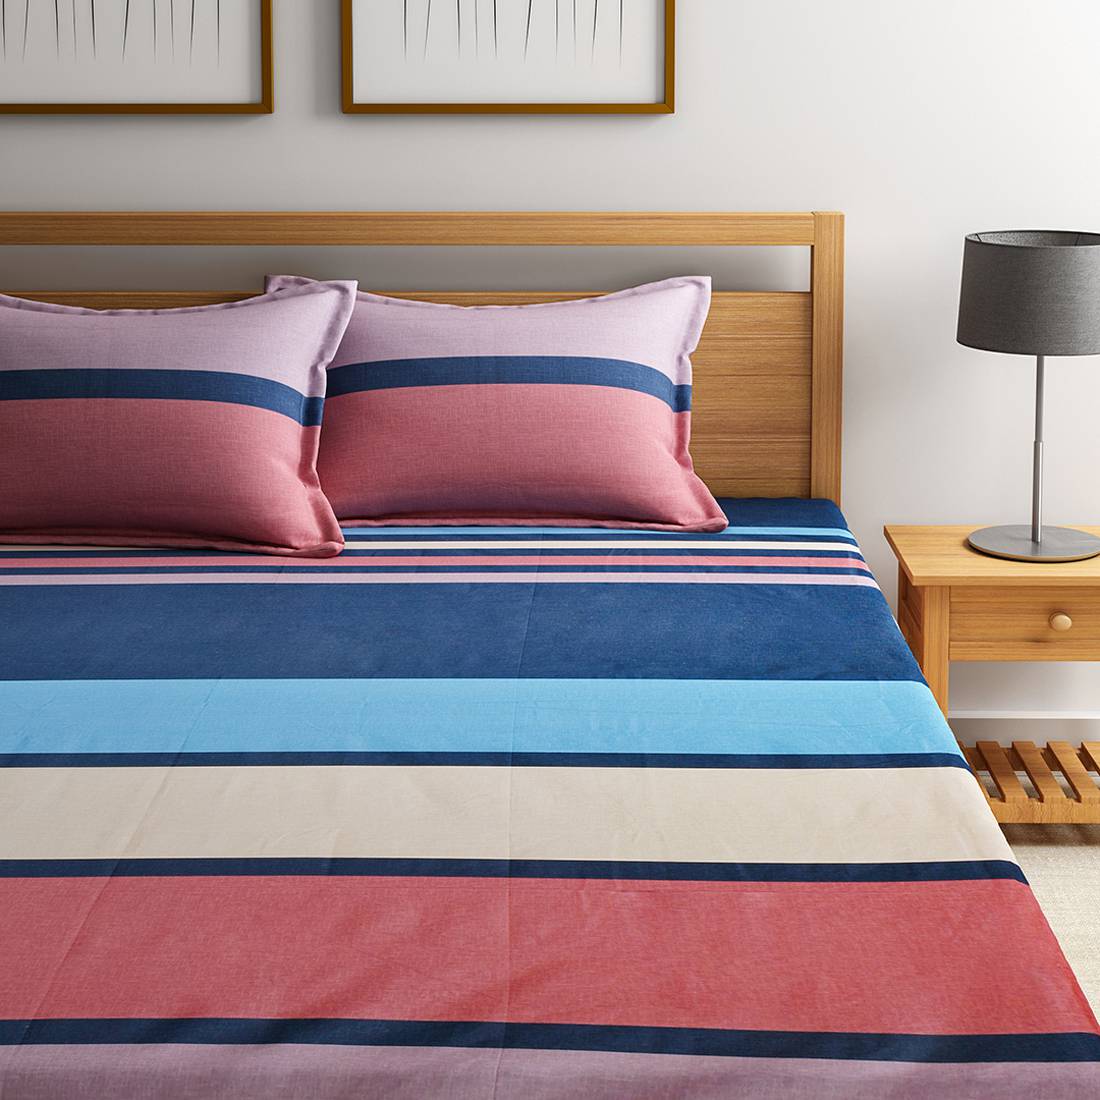 Upto 70% Off on Bedsheets on Republic Day Sale - Urban Ladder